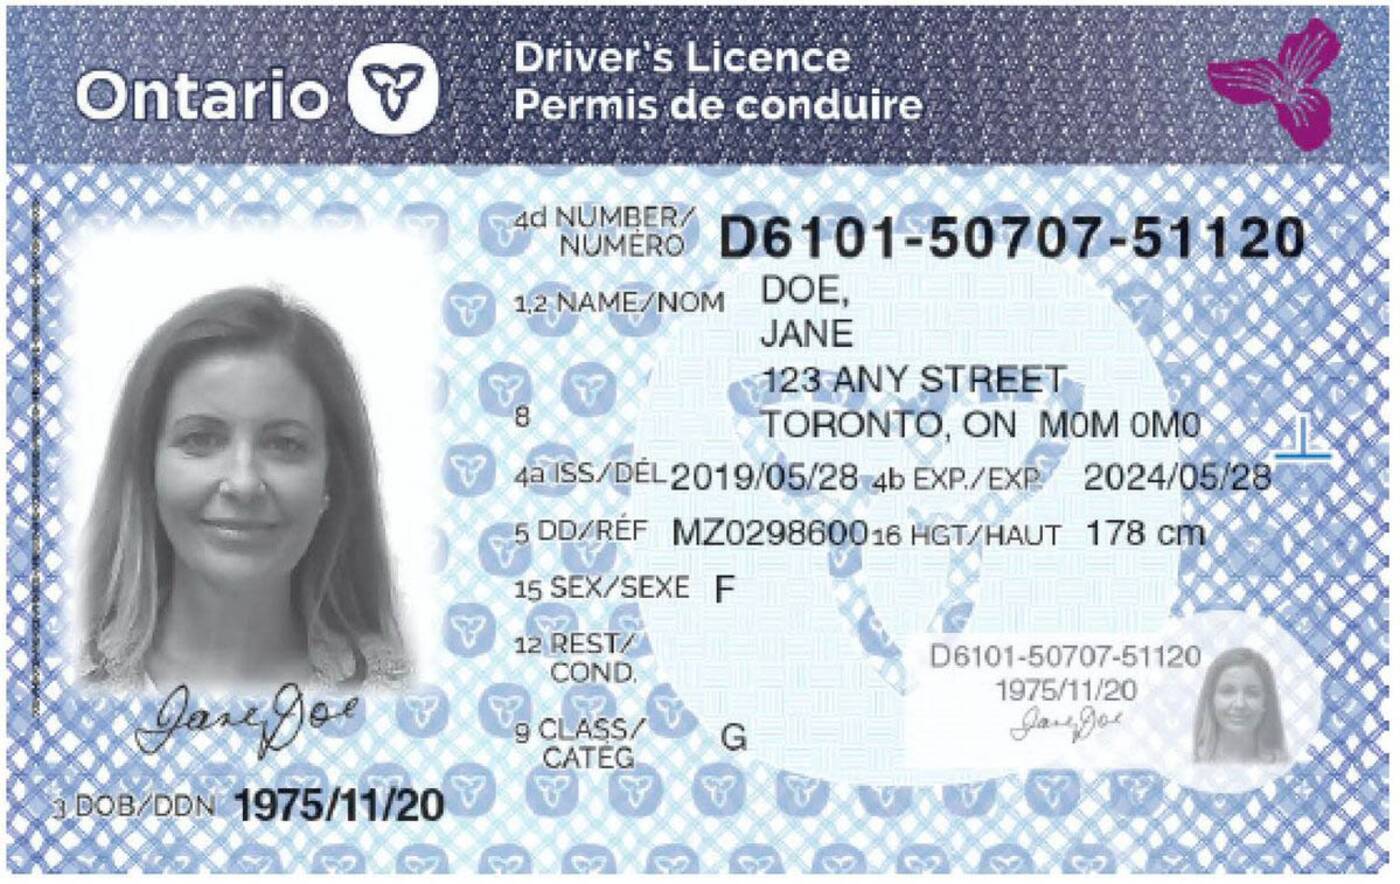 Ontario is getting new driver's licences